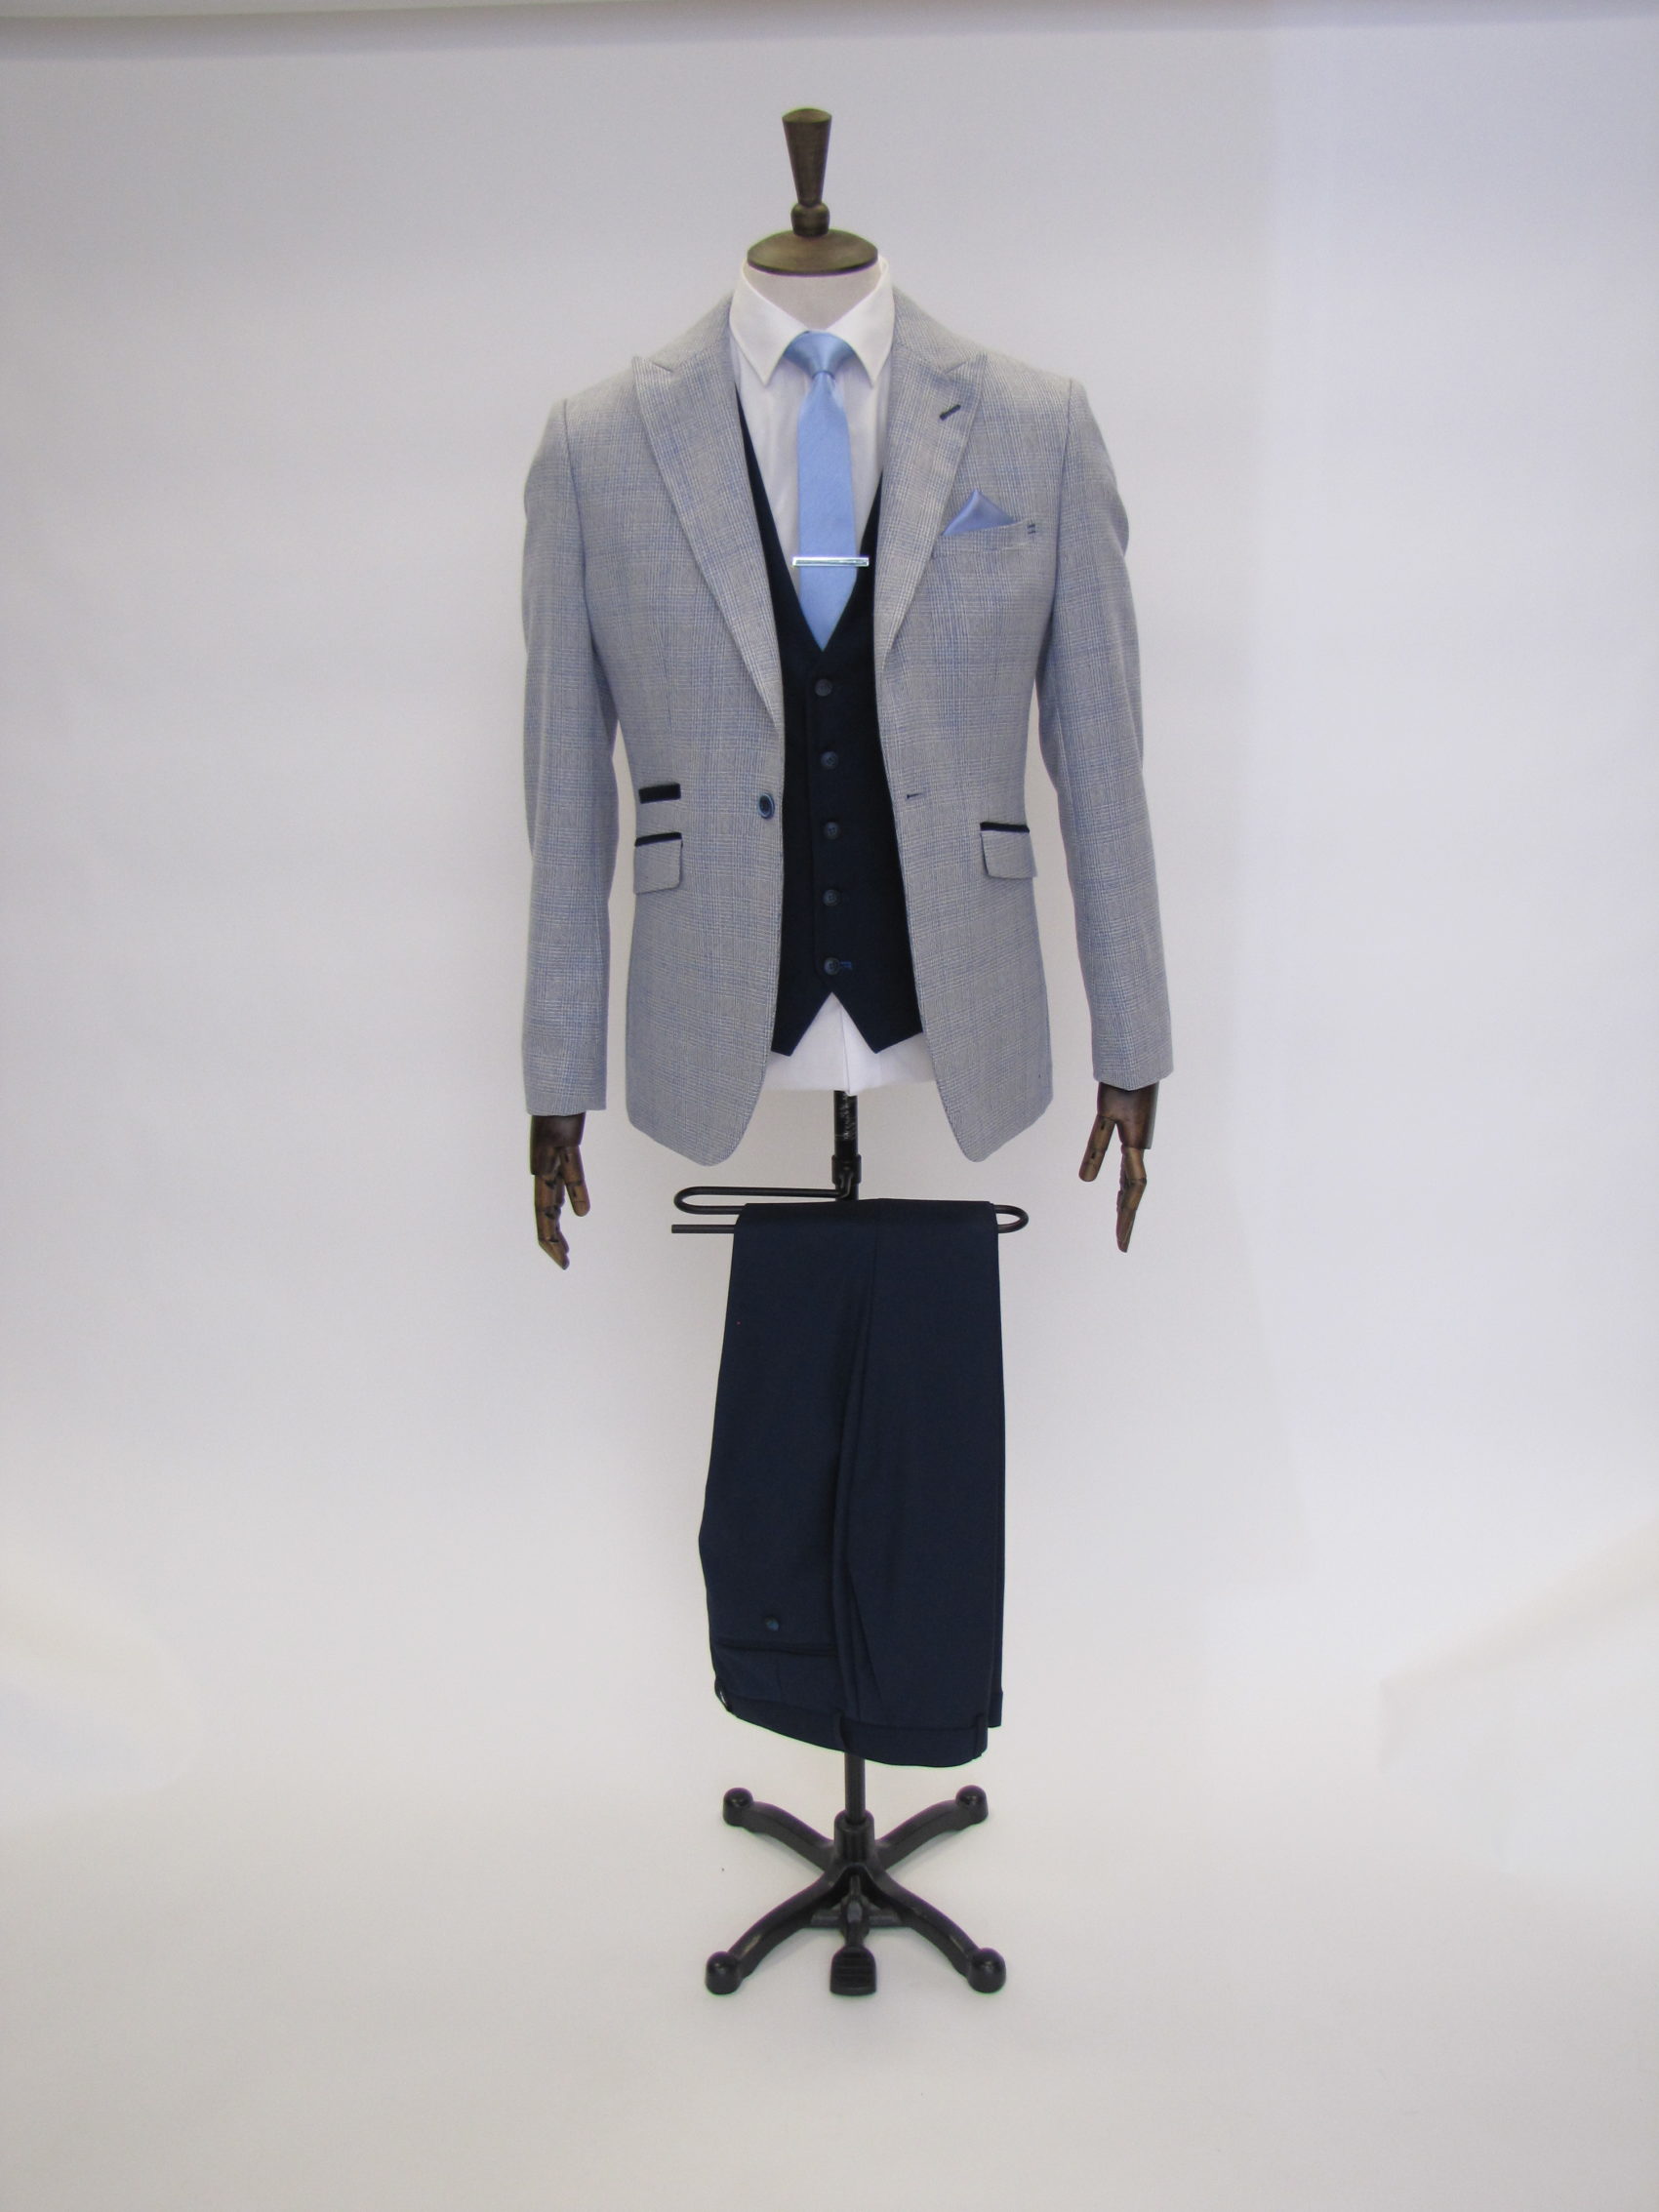 Blue Morning dress with grey waistcoat and blue Trousers with pocket square